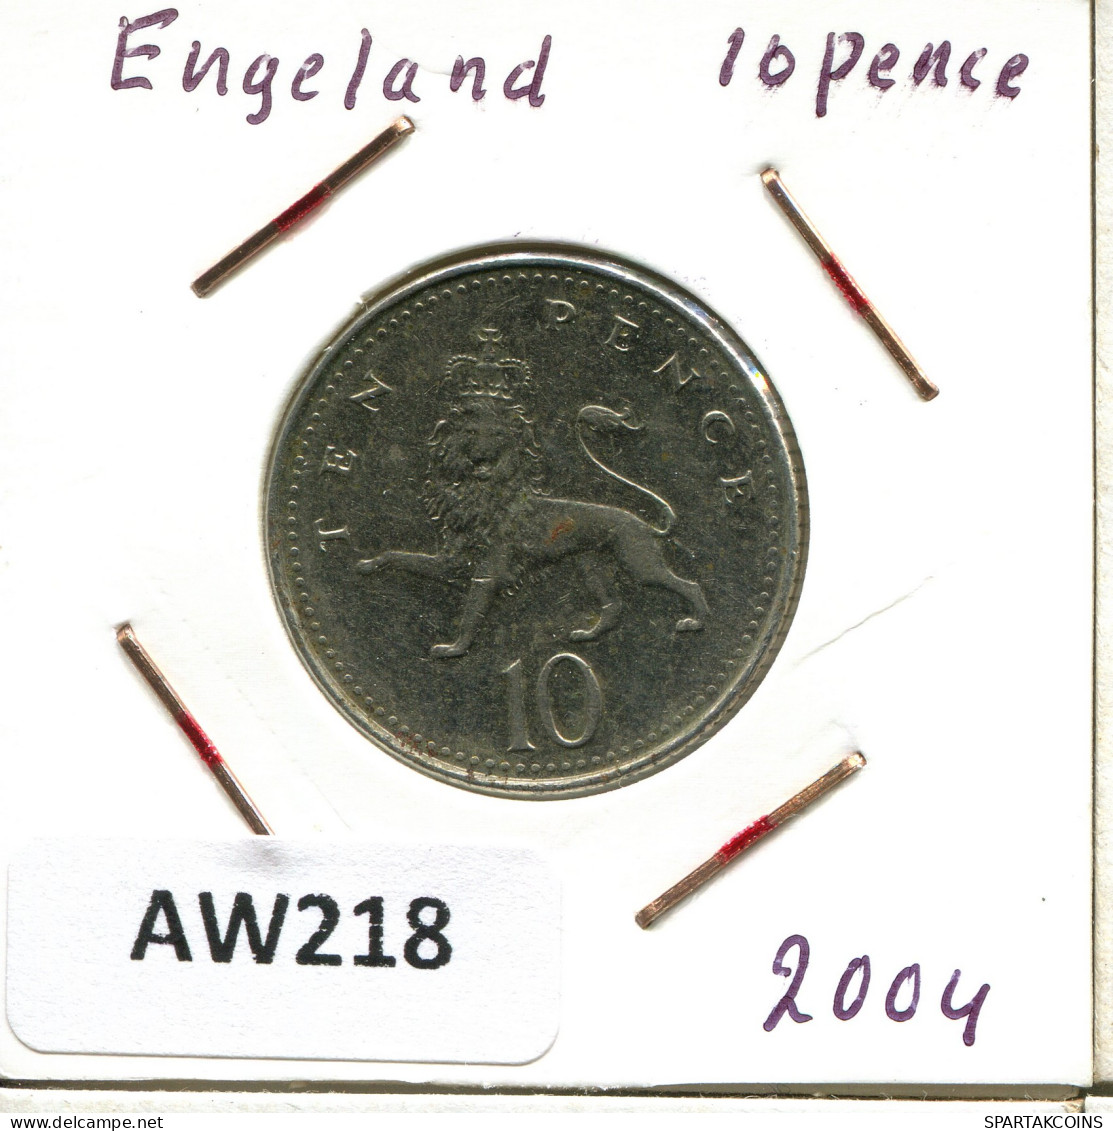 10 PENCE 2004 UK GREAT BRITAIN Coin #AW218.U - 10 Pence & 10 New Pence